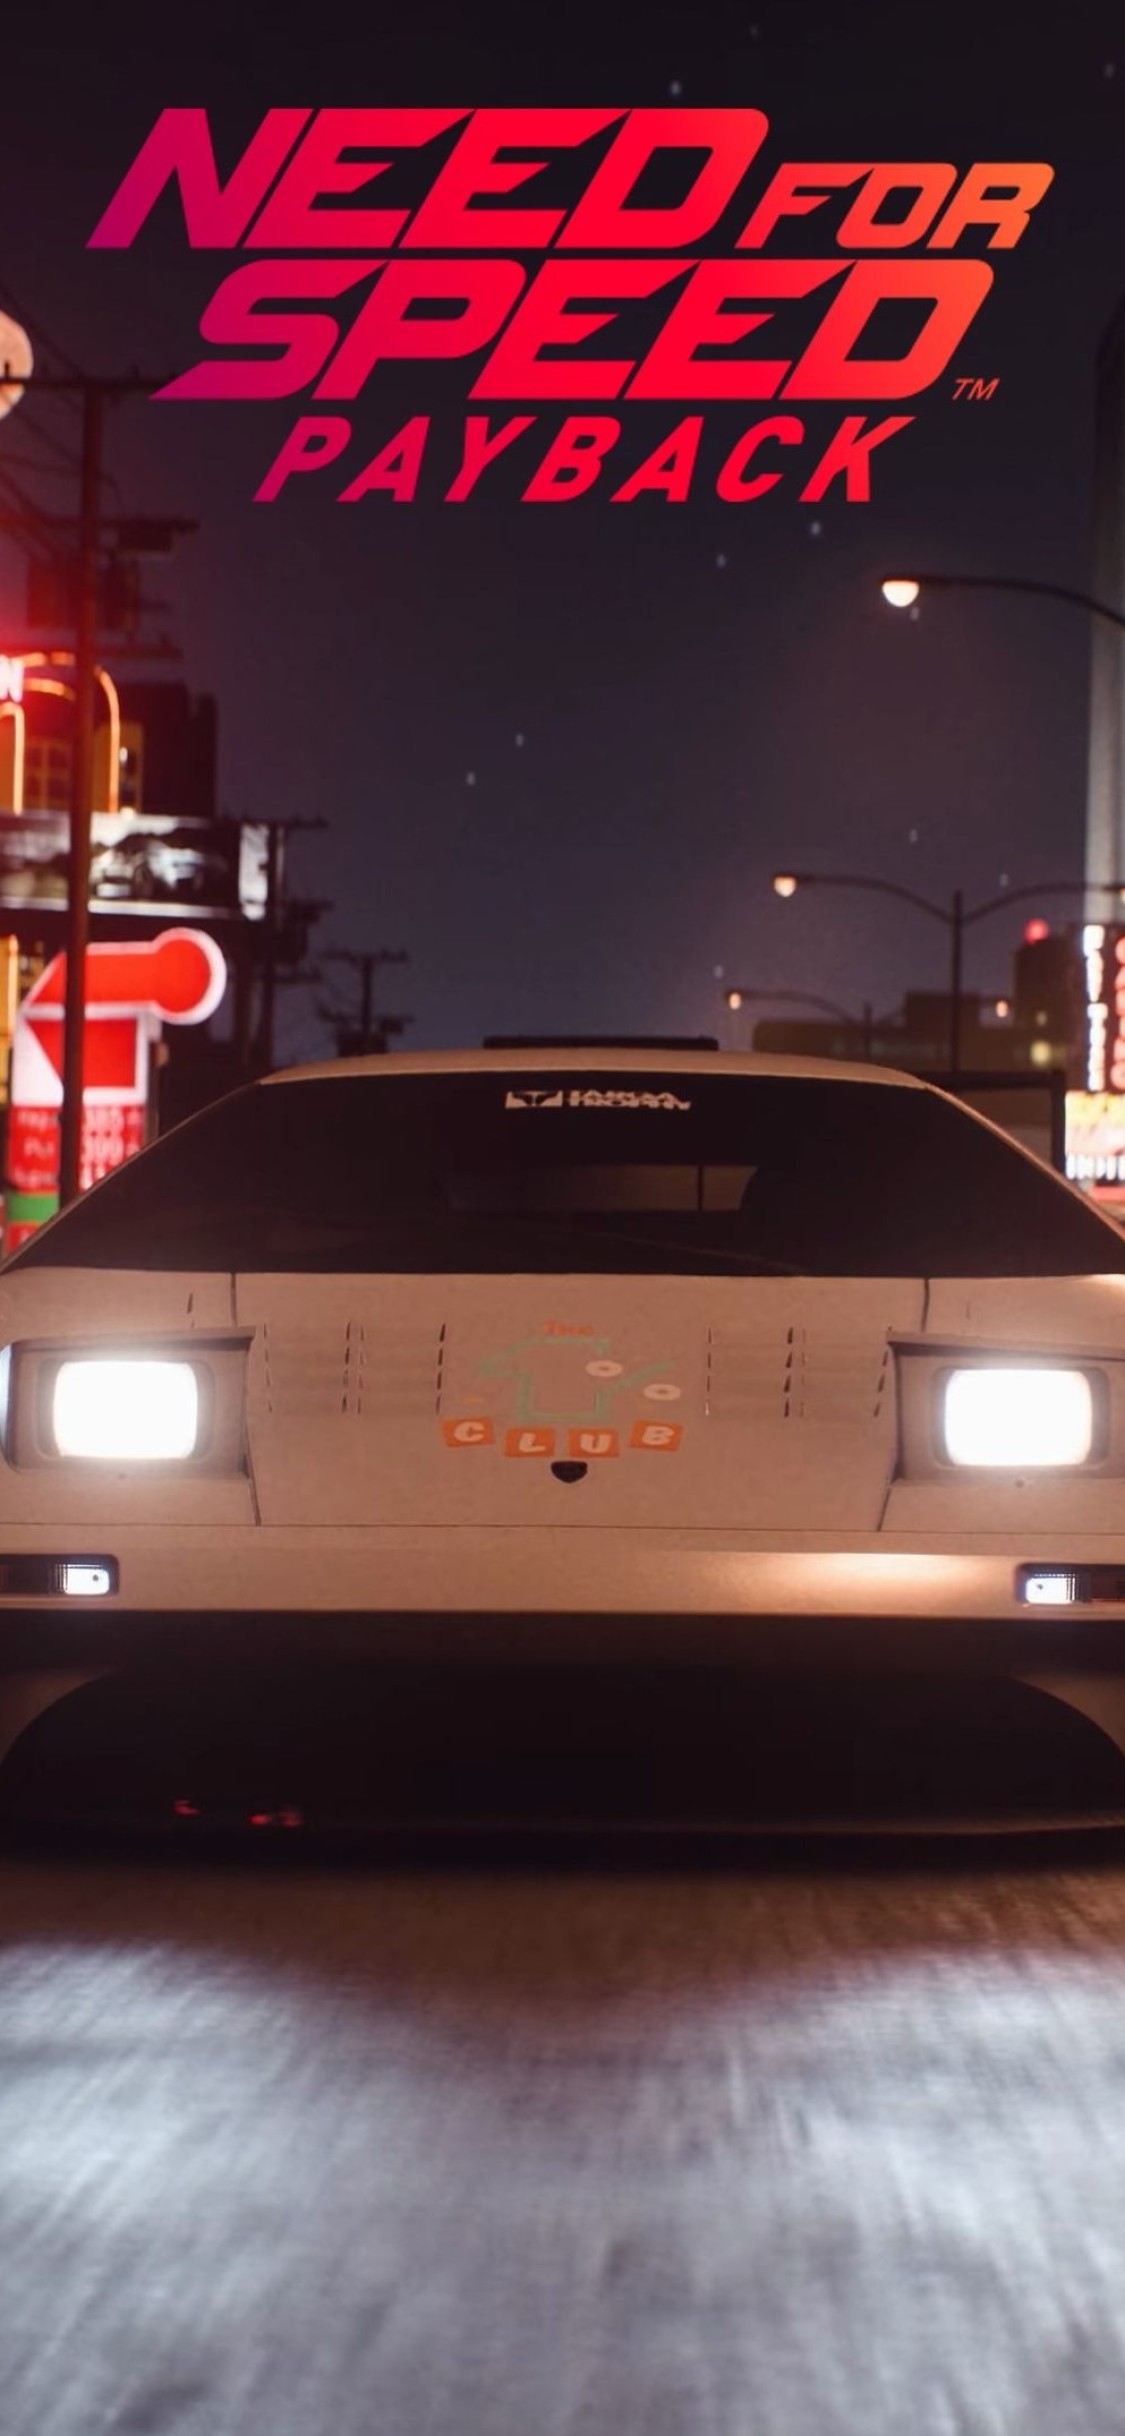 Iphone Need For Speed Payback - HD Wallpaper 